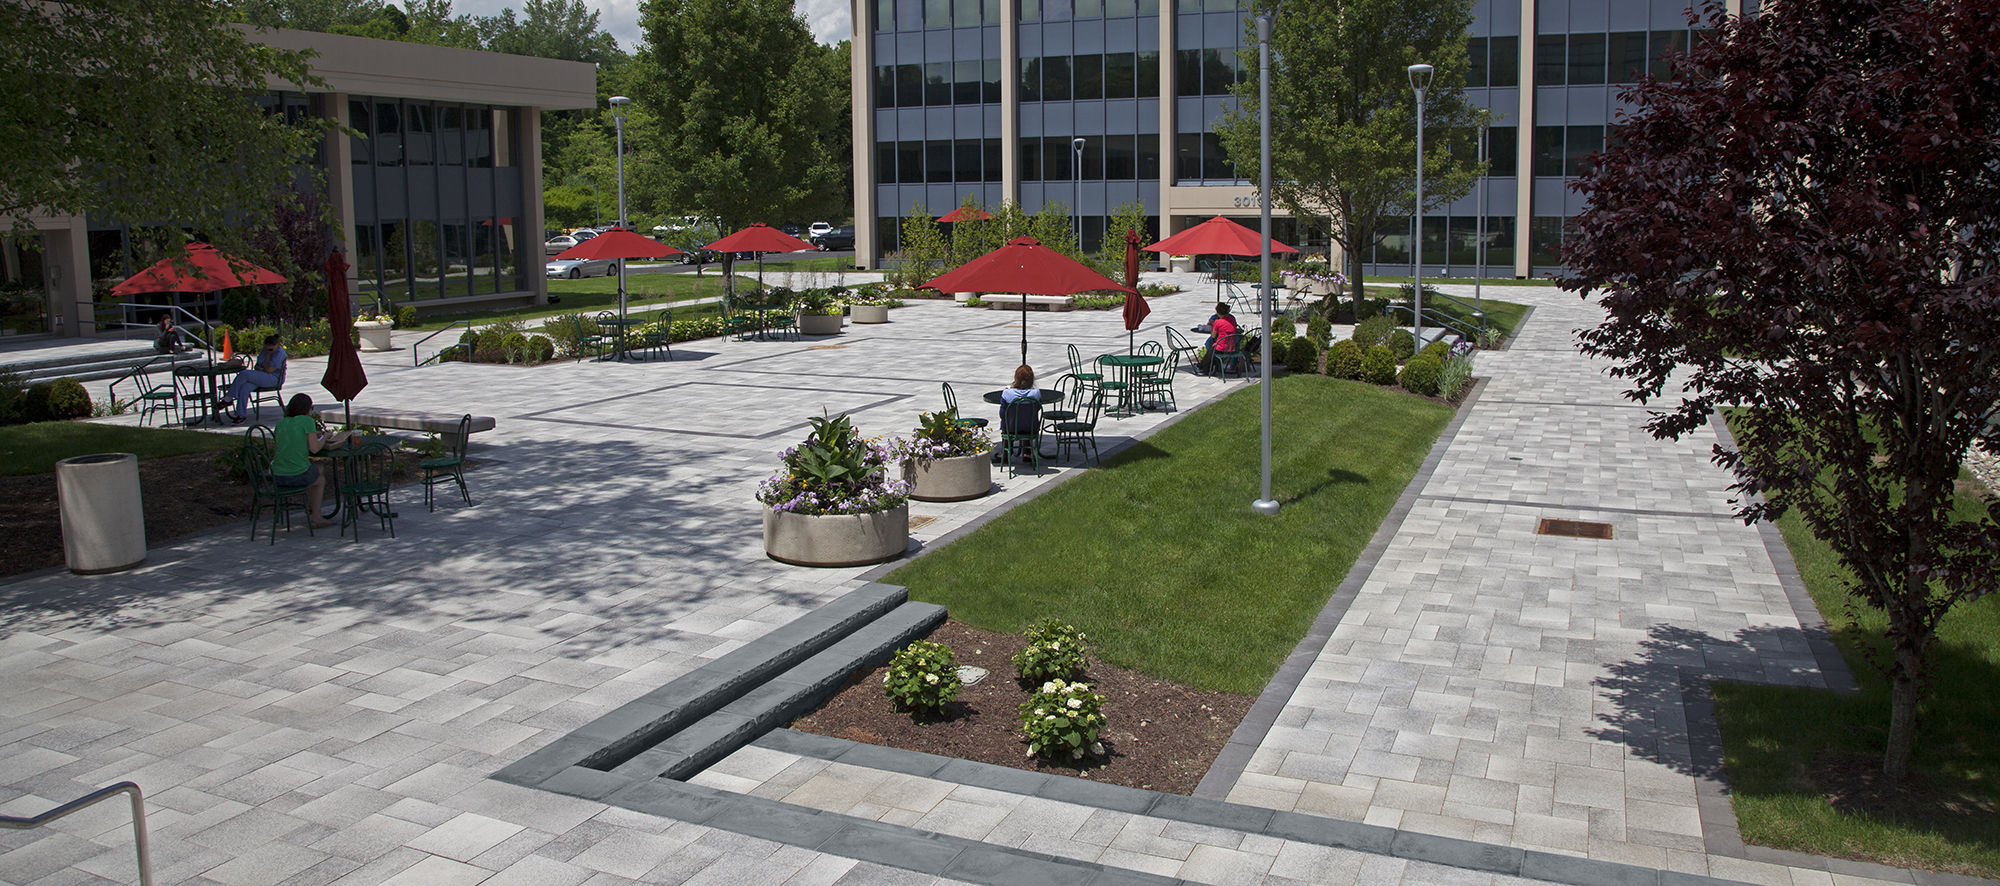 Umbriano pavers visually enhance colorful elements around the plaza, including garden beds, planters, tables, chairs, and umbrellas.